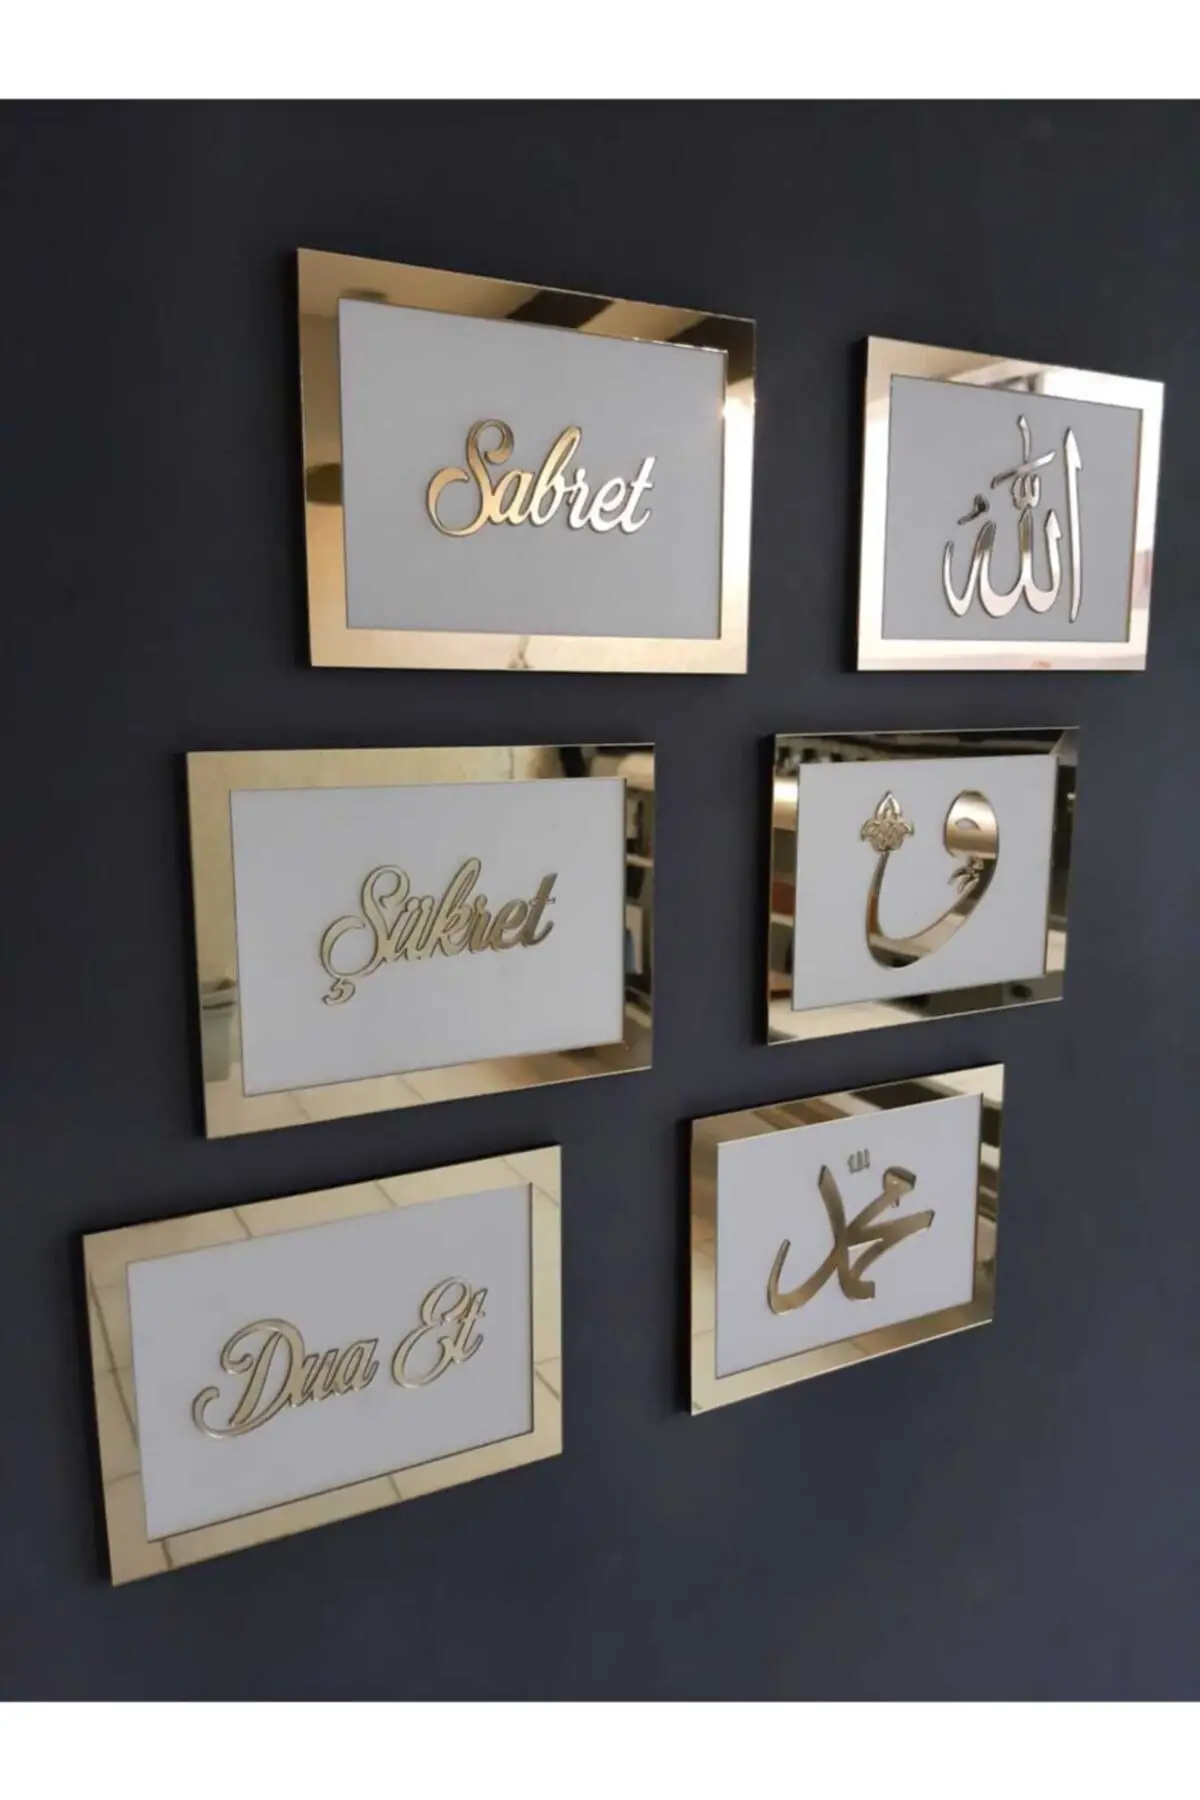 

6 Pieces Prayer Set Wall Art MDF Top Mirrored Gold Silver Picture Frame Living Room Living Room Decor Stylish Design Poster Prin